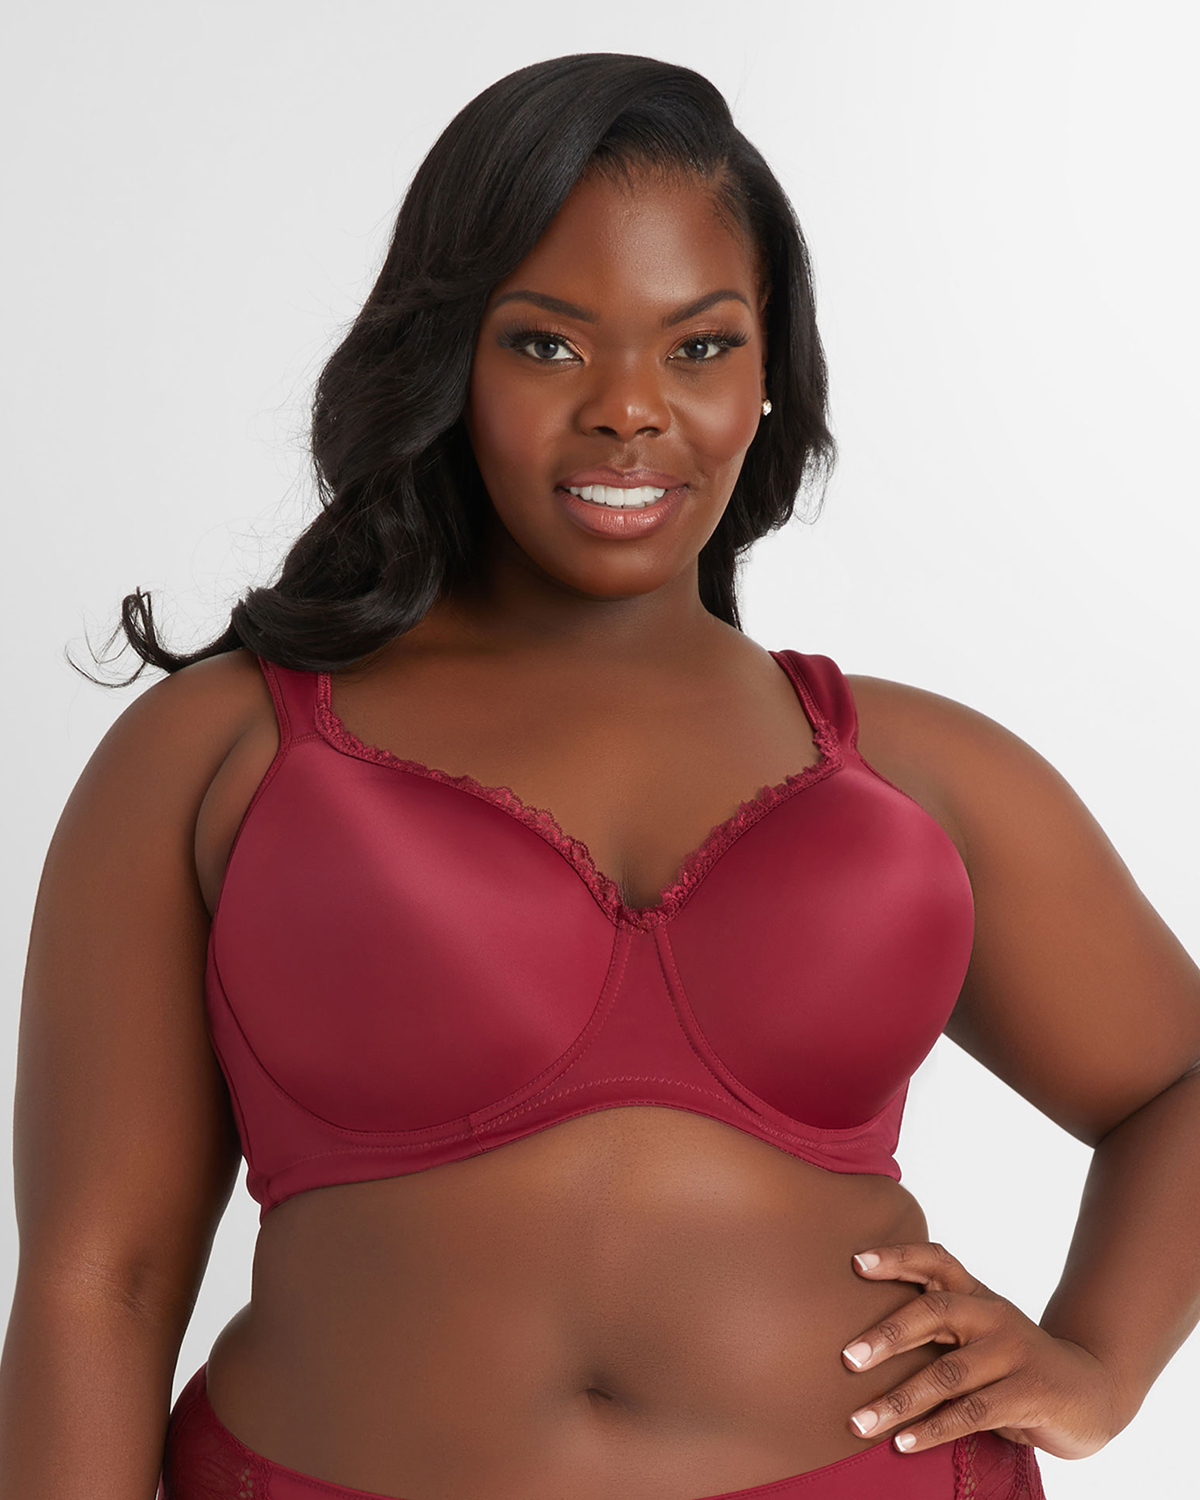 Sky Mall Barbados - AVAILABLE NOW FROM Secrexx! This Ashley Stewart  butterfly full coverage bra and its flawless fit makes it our most-loved bra.  The double-back wrap panels conform to your curves